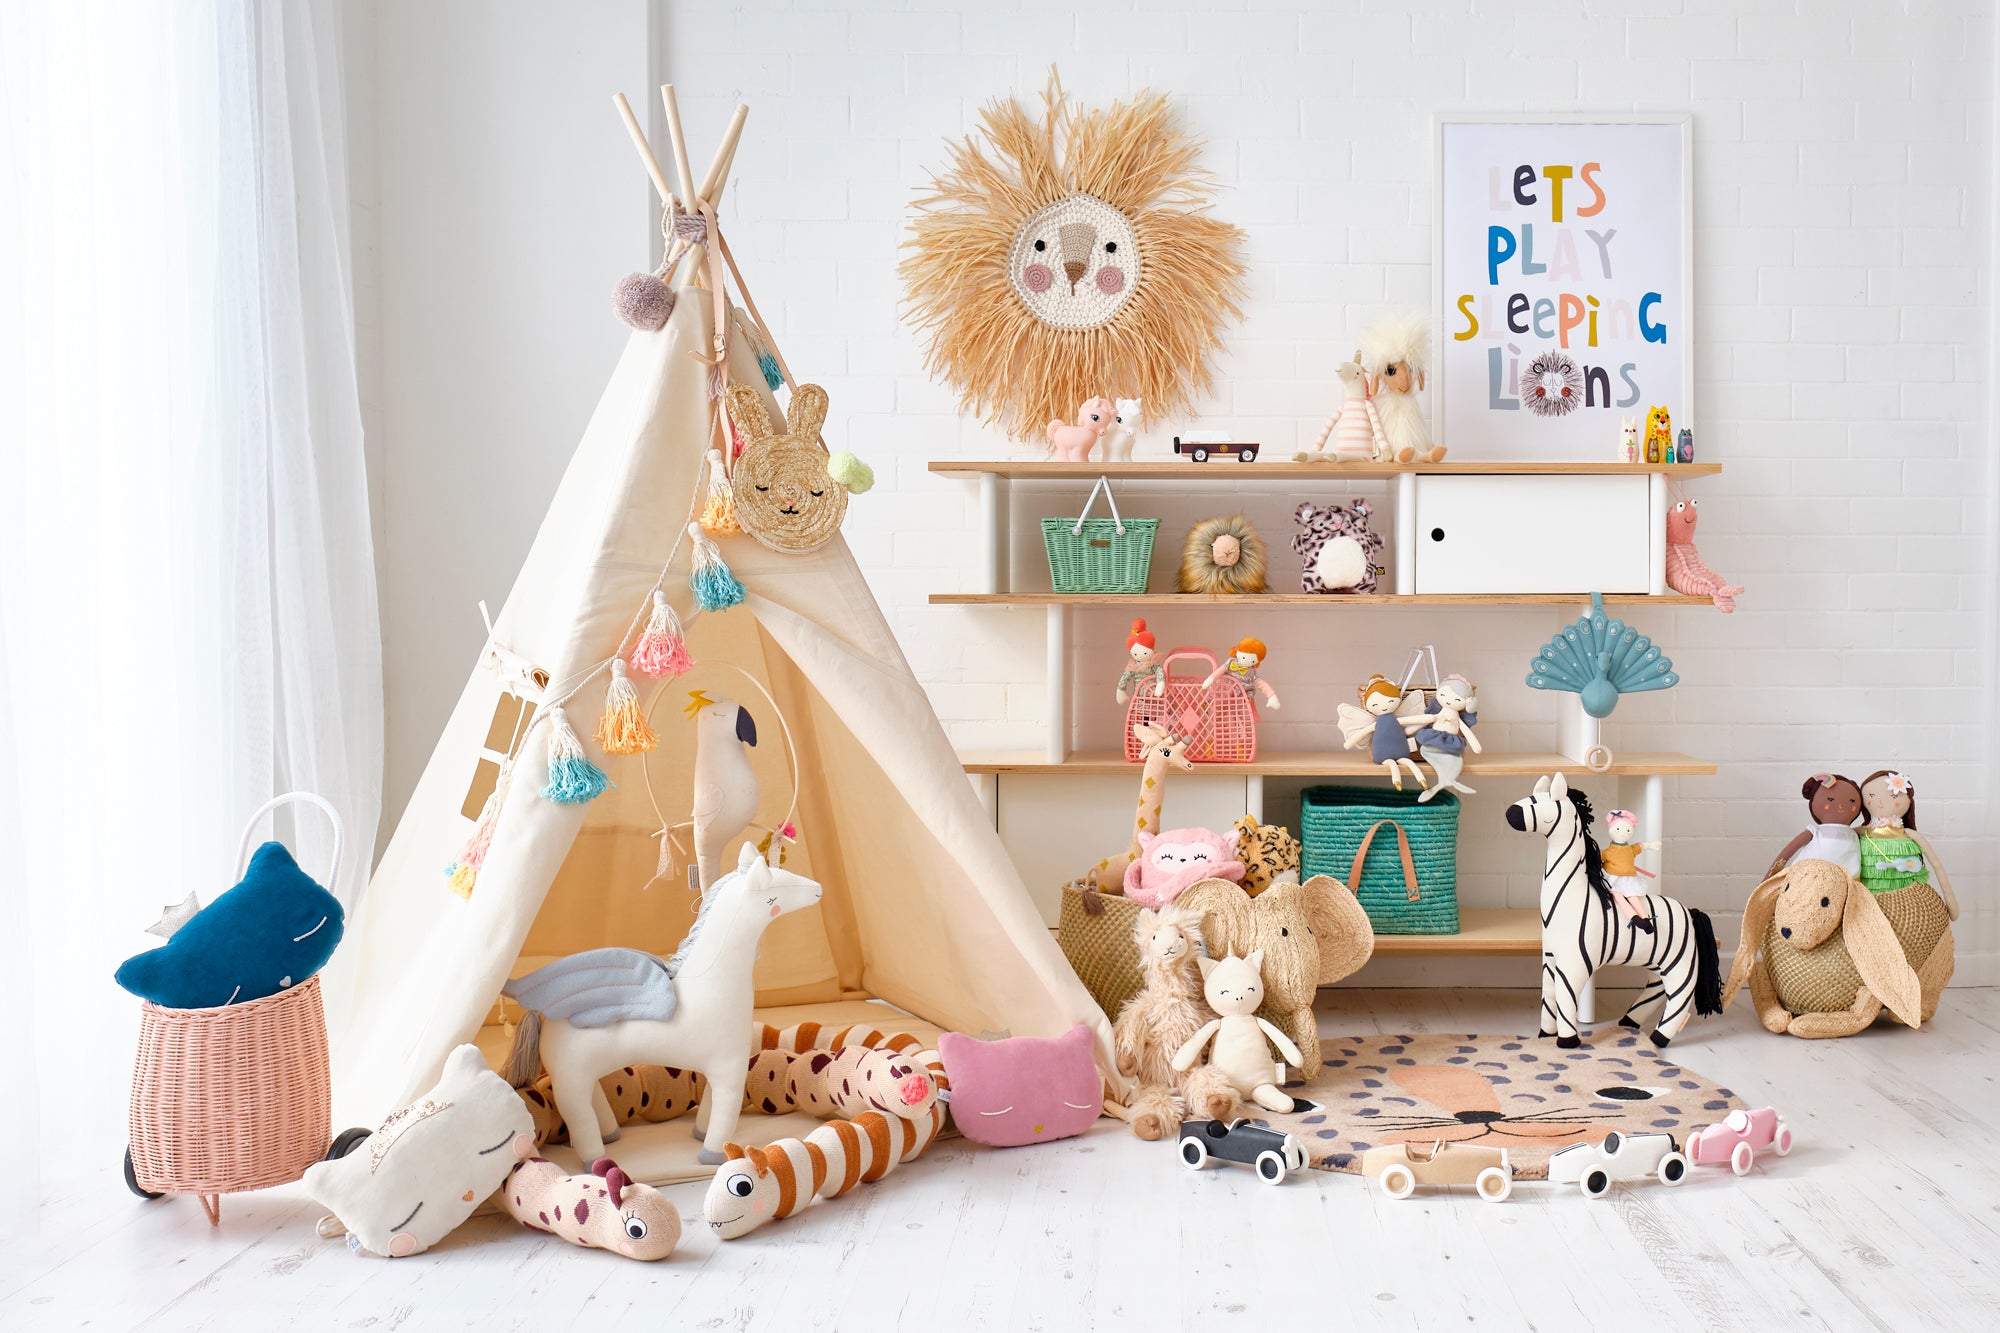 ‘Savannah!’ Children’s Playroom, Toys and Accessories, styled by Bobby Rabbit.